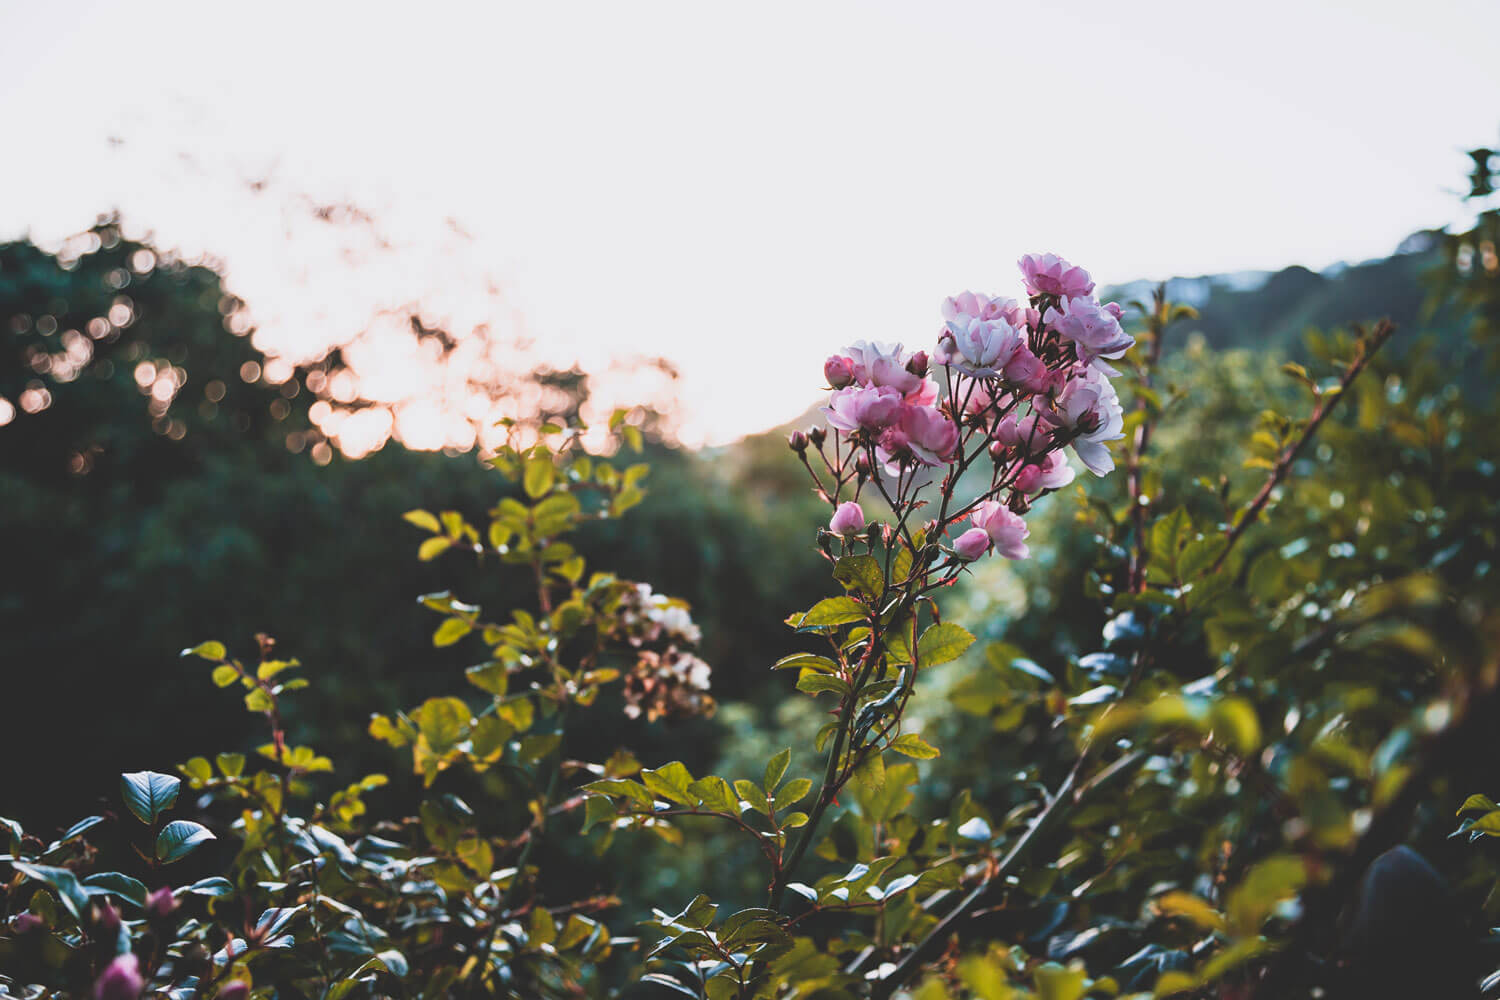 Selective focus image of flowers at sunset